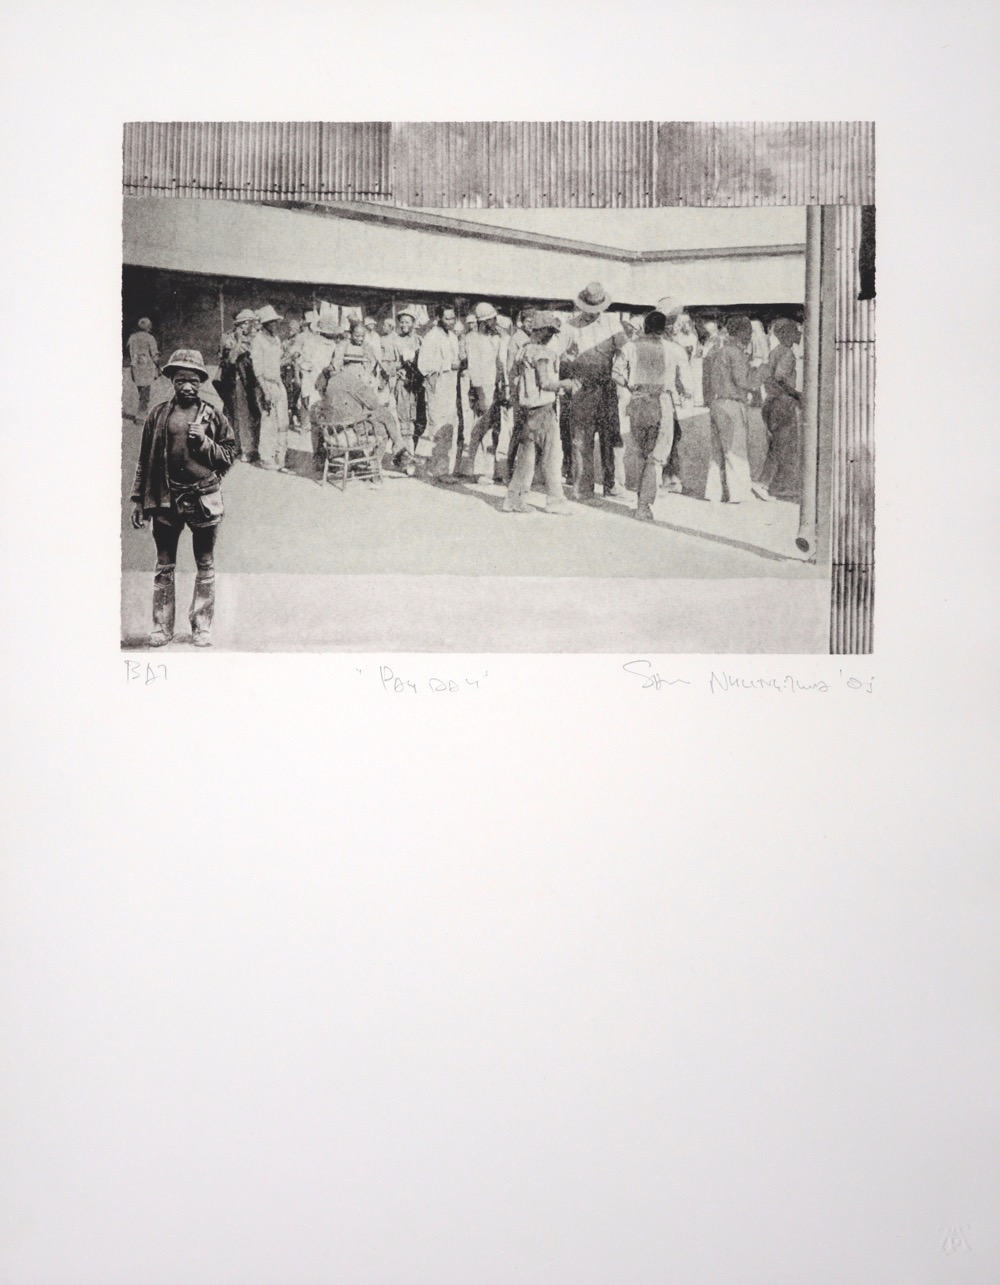 Miners waiting in line with corrugated iron wall behind them